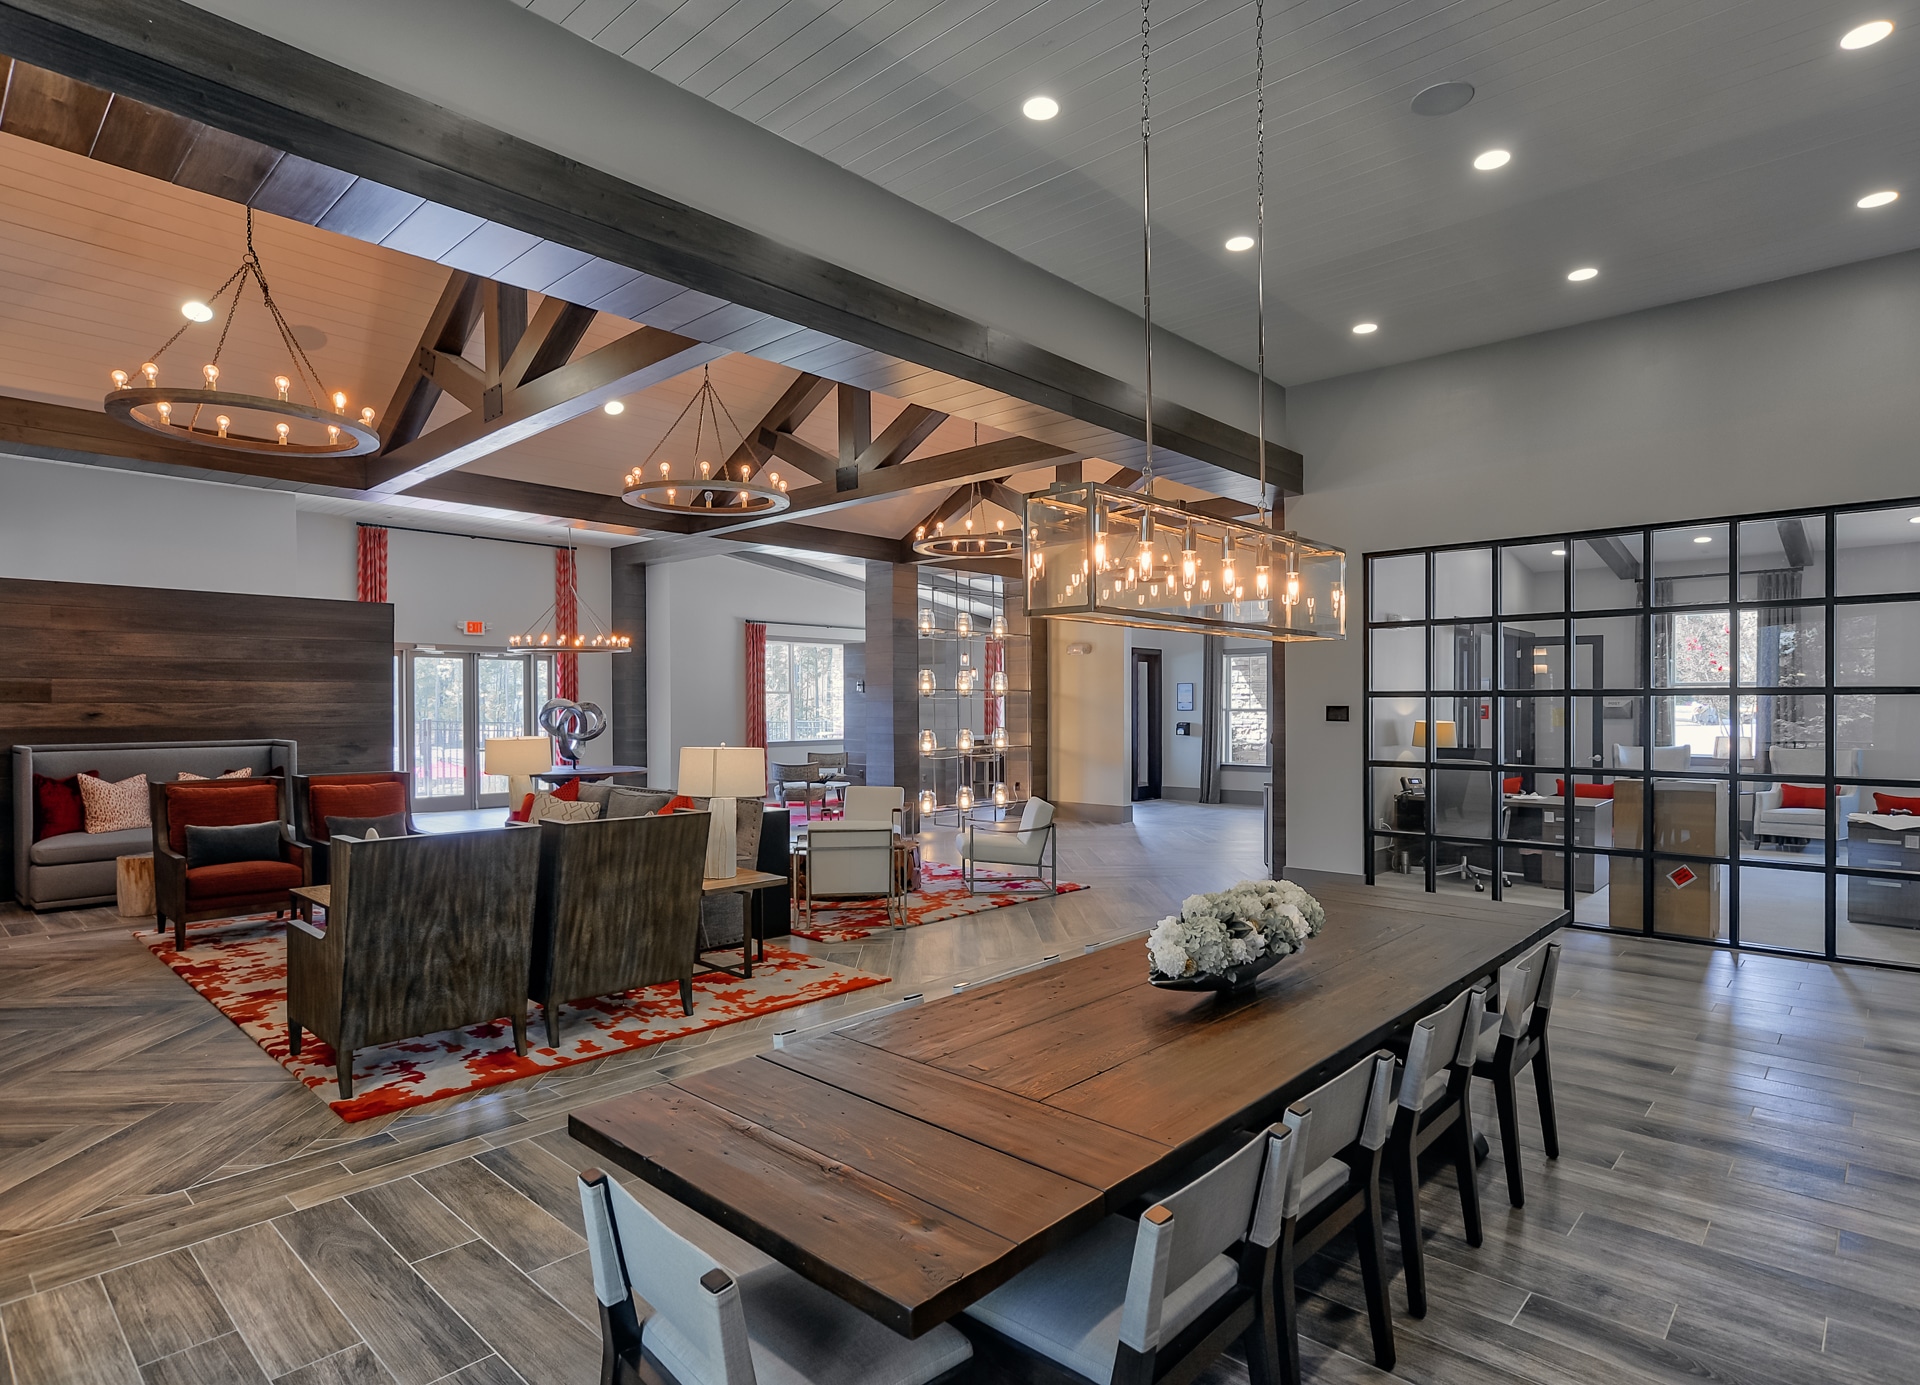 Image shows view of the public room at Lodge at Croasdaile Farm Apartments in Durham, NC by architectural photographer Bruce Johnson